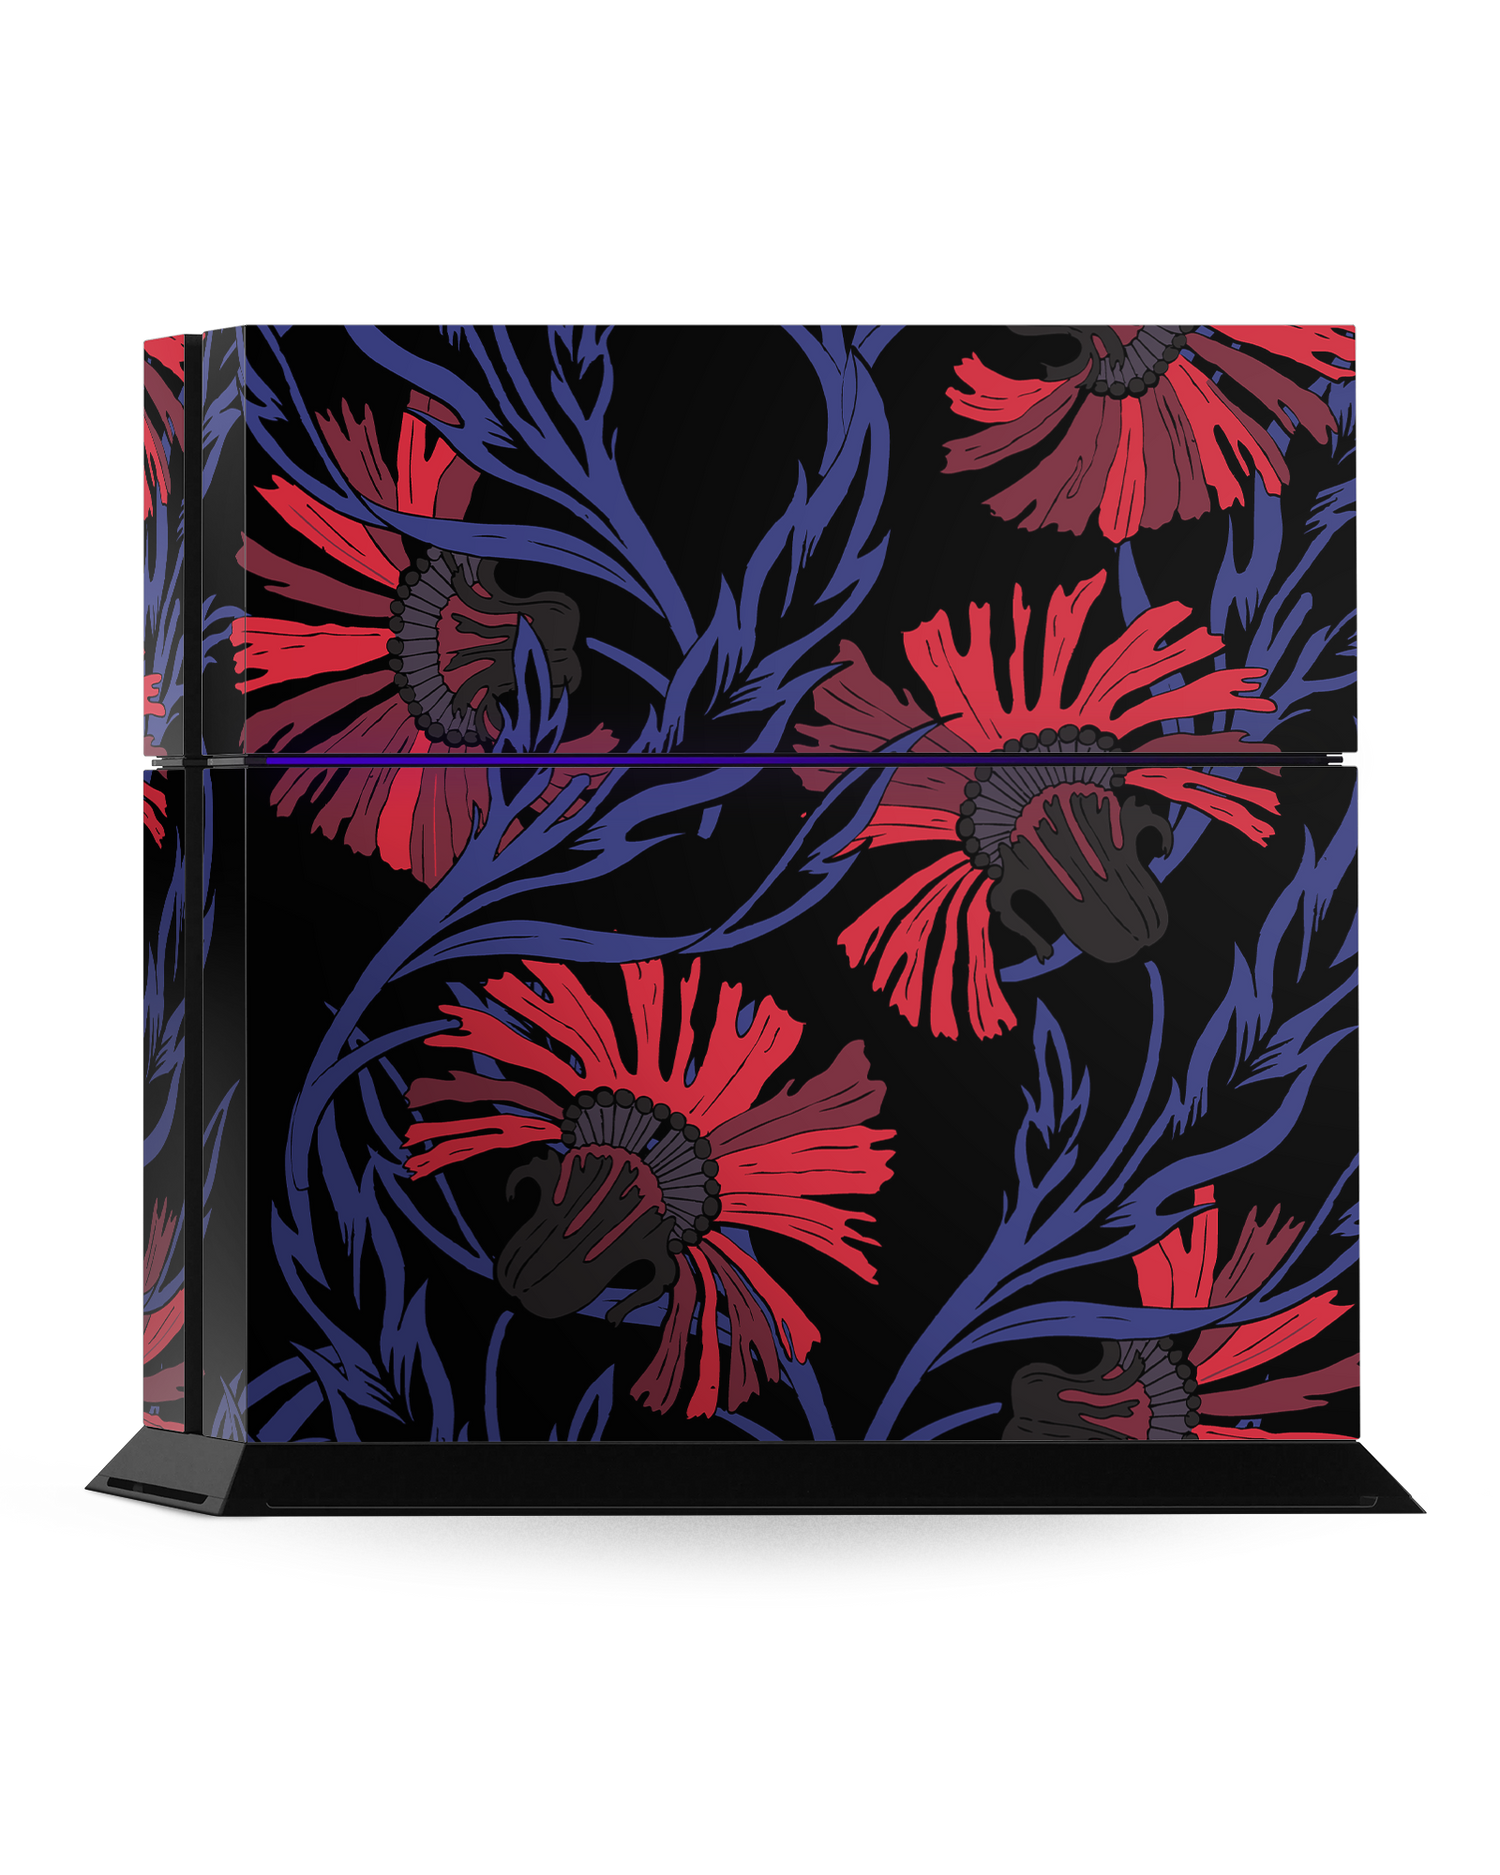 Midnight Floral Console Skin for Sony PlayStation 4: Standing